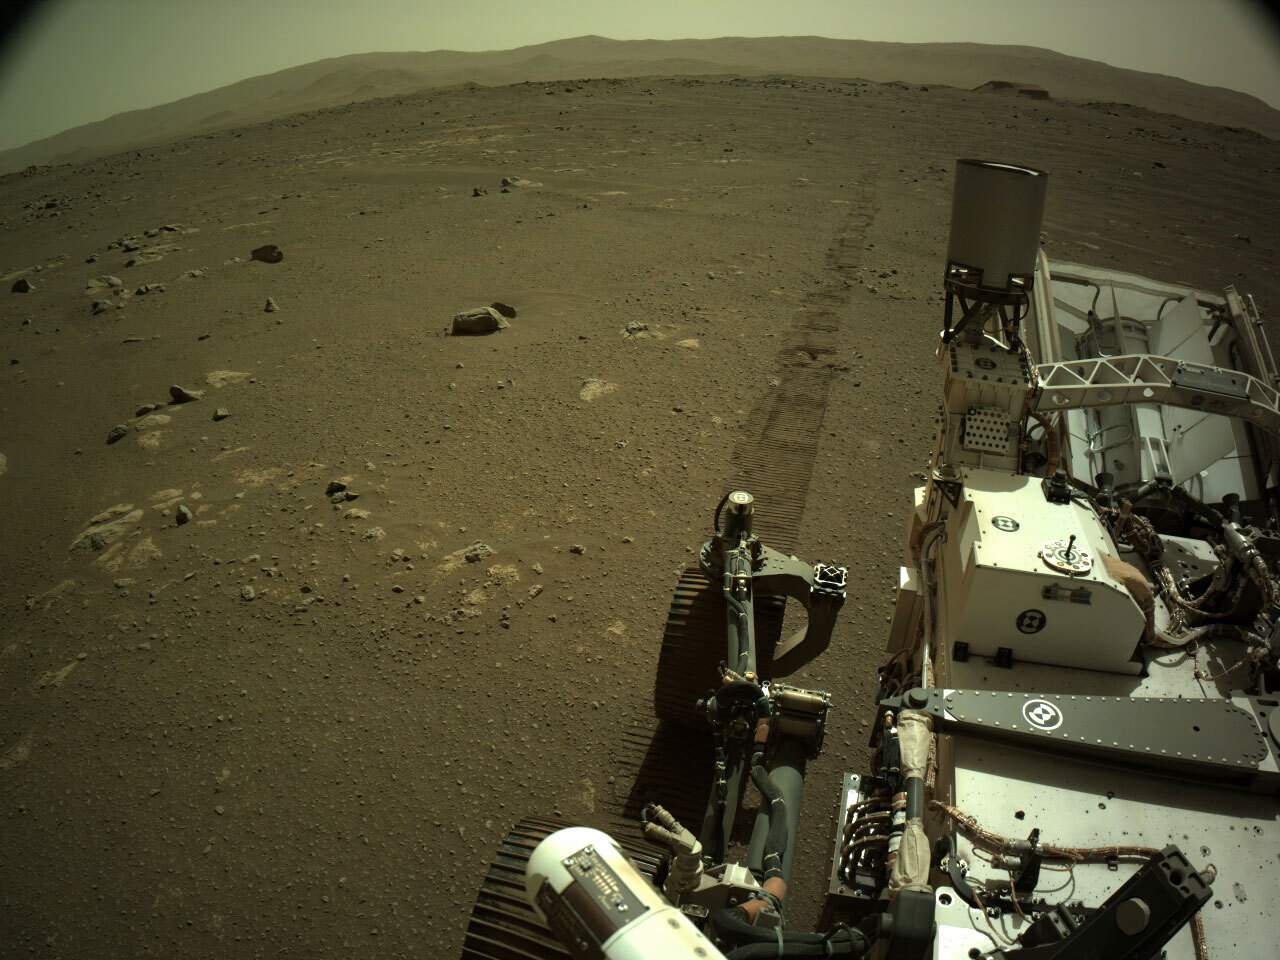 Mars rover sends back grinding, squealing sounds of driving